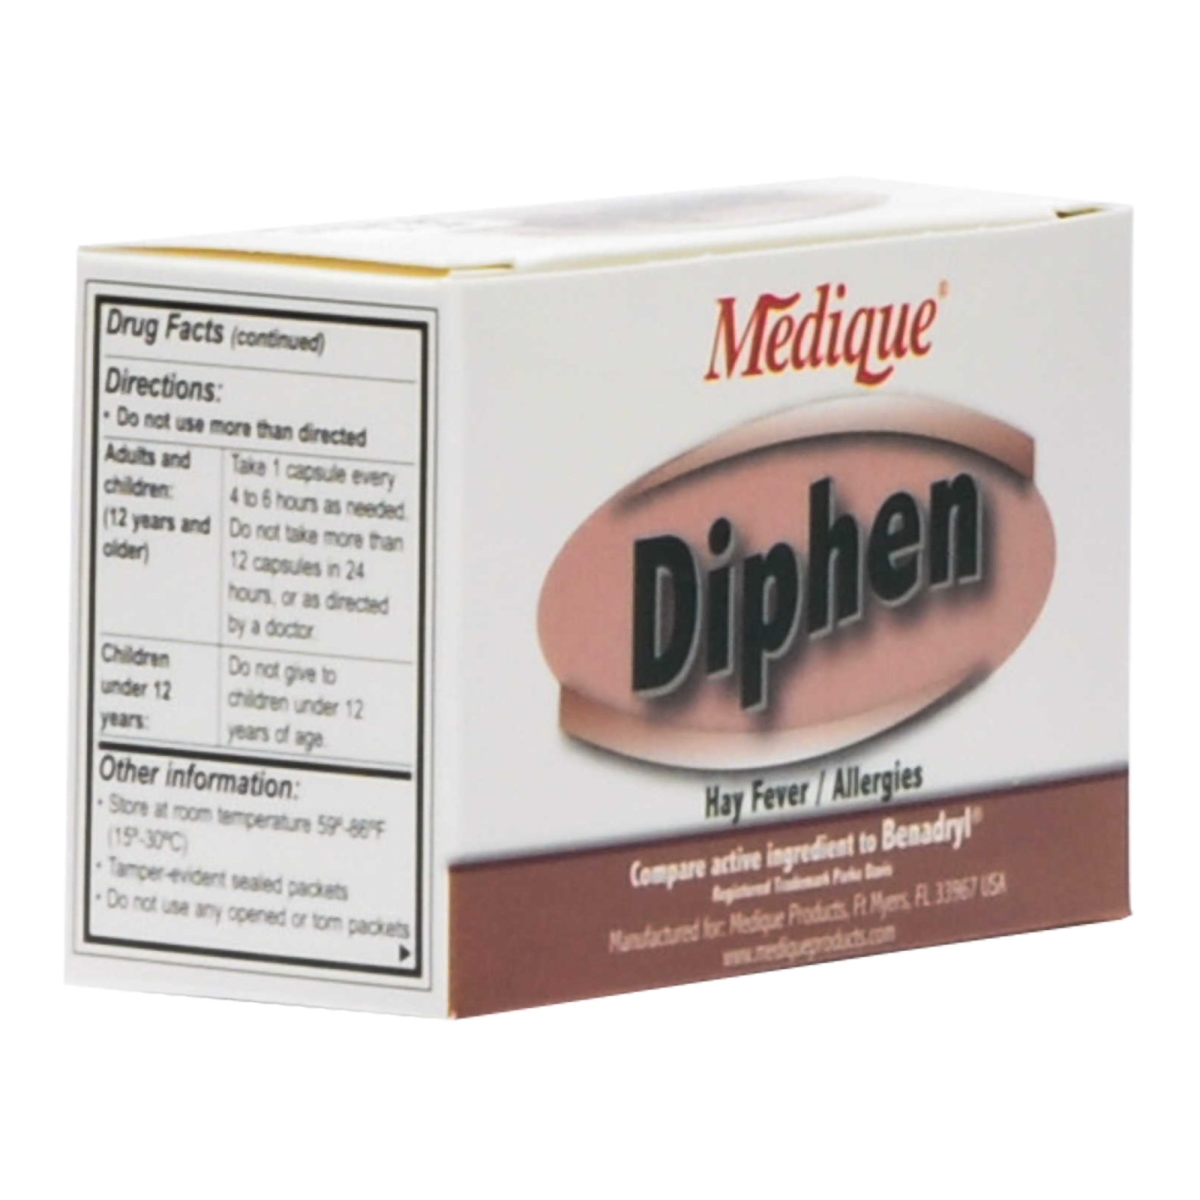 Picture of Medique Products 498724-CS Diphen Diphenhydramine Allergy Relief - 24 per Box - 25 Box per Case